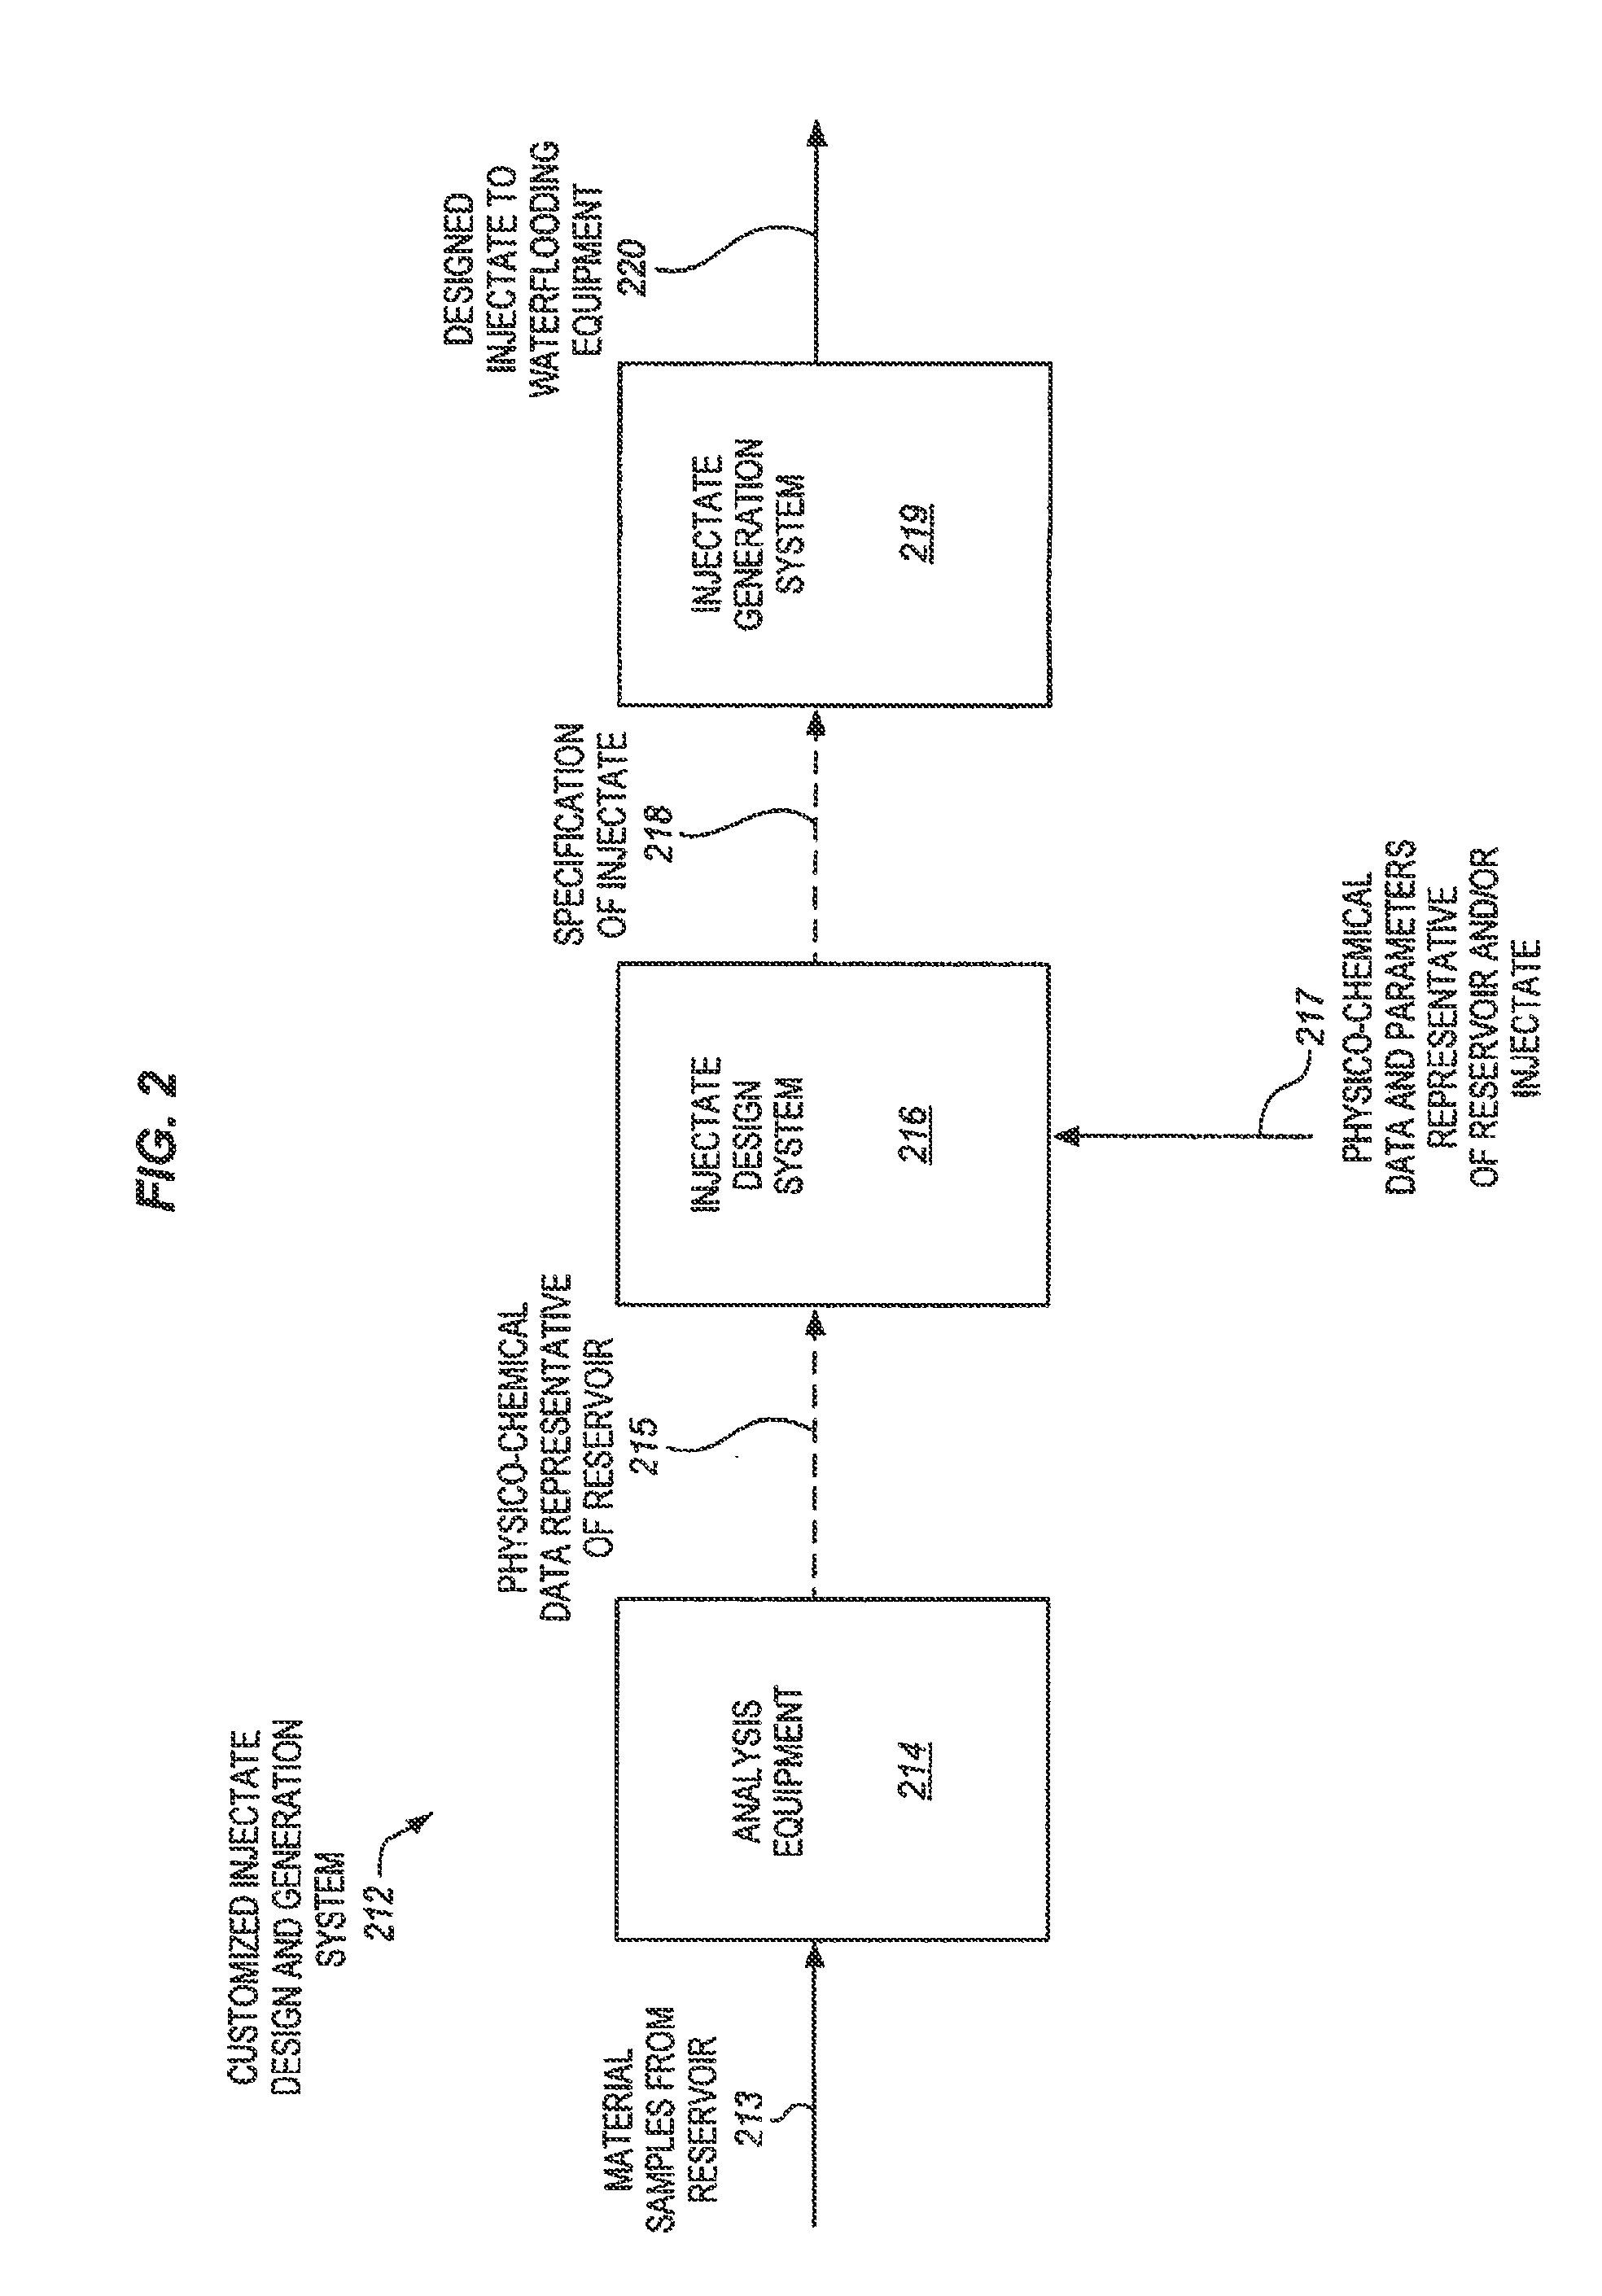 Waterflooding injectate design systems and methods